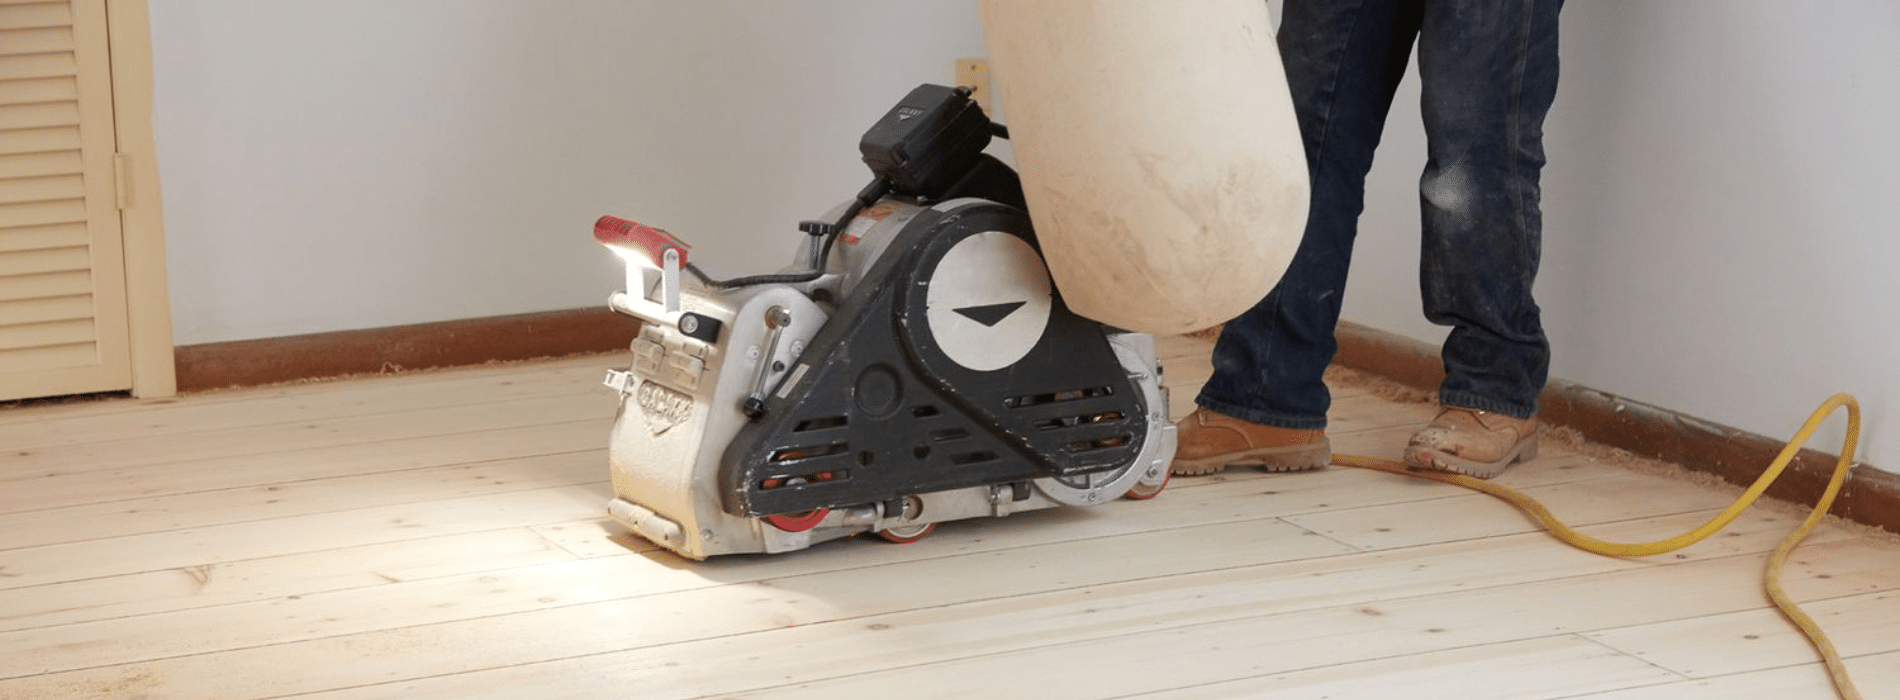 Mr Sander® sanding a parquet floor with a Bona Scorpion drum sander in Upminster, RM14. The sander is 200 mm in dimension, has a 1.5 kW effect, and operates at 240 V and 50 Hz. A dust extraction system with a HEPA filter ensures clean and efficient results. 